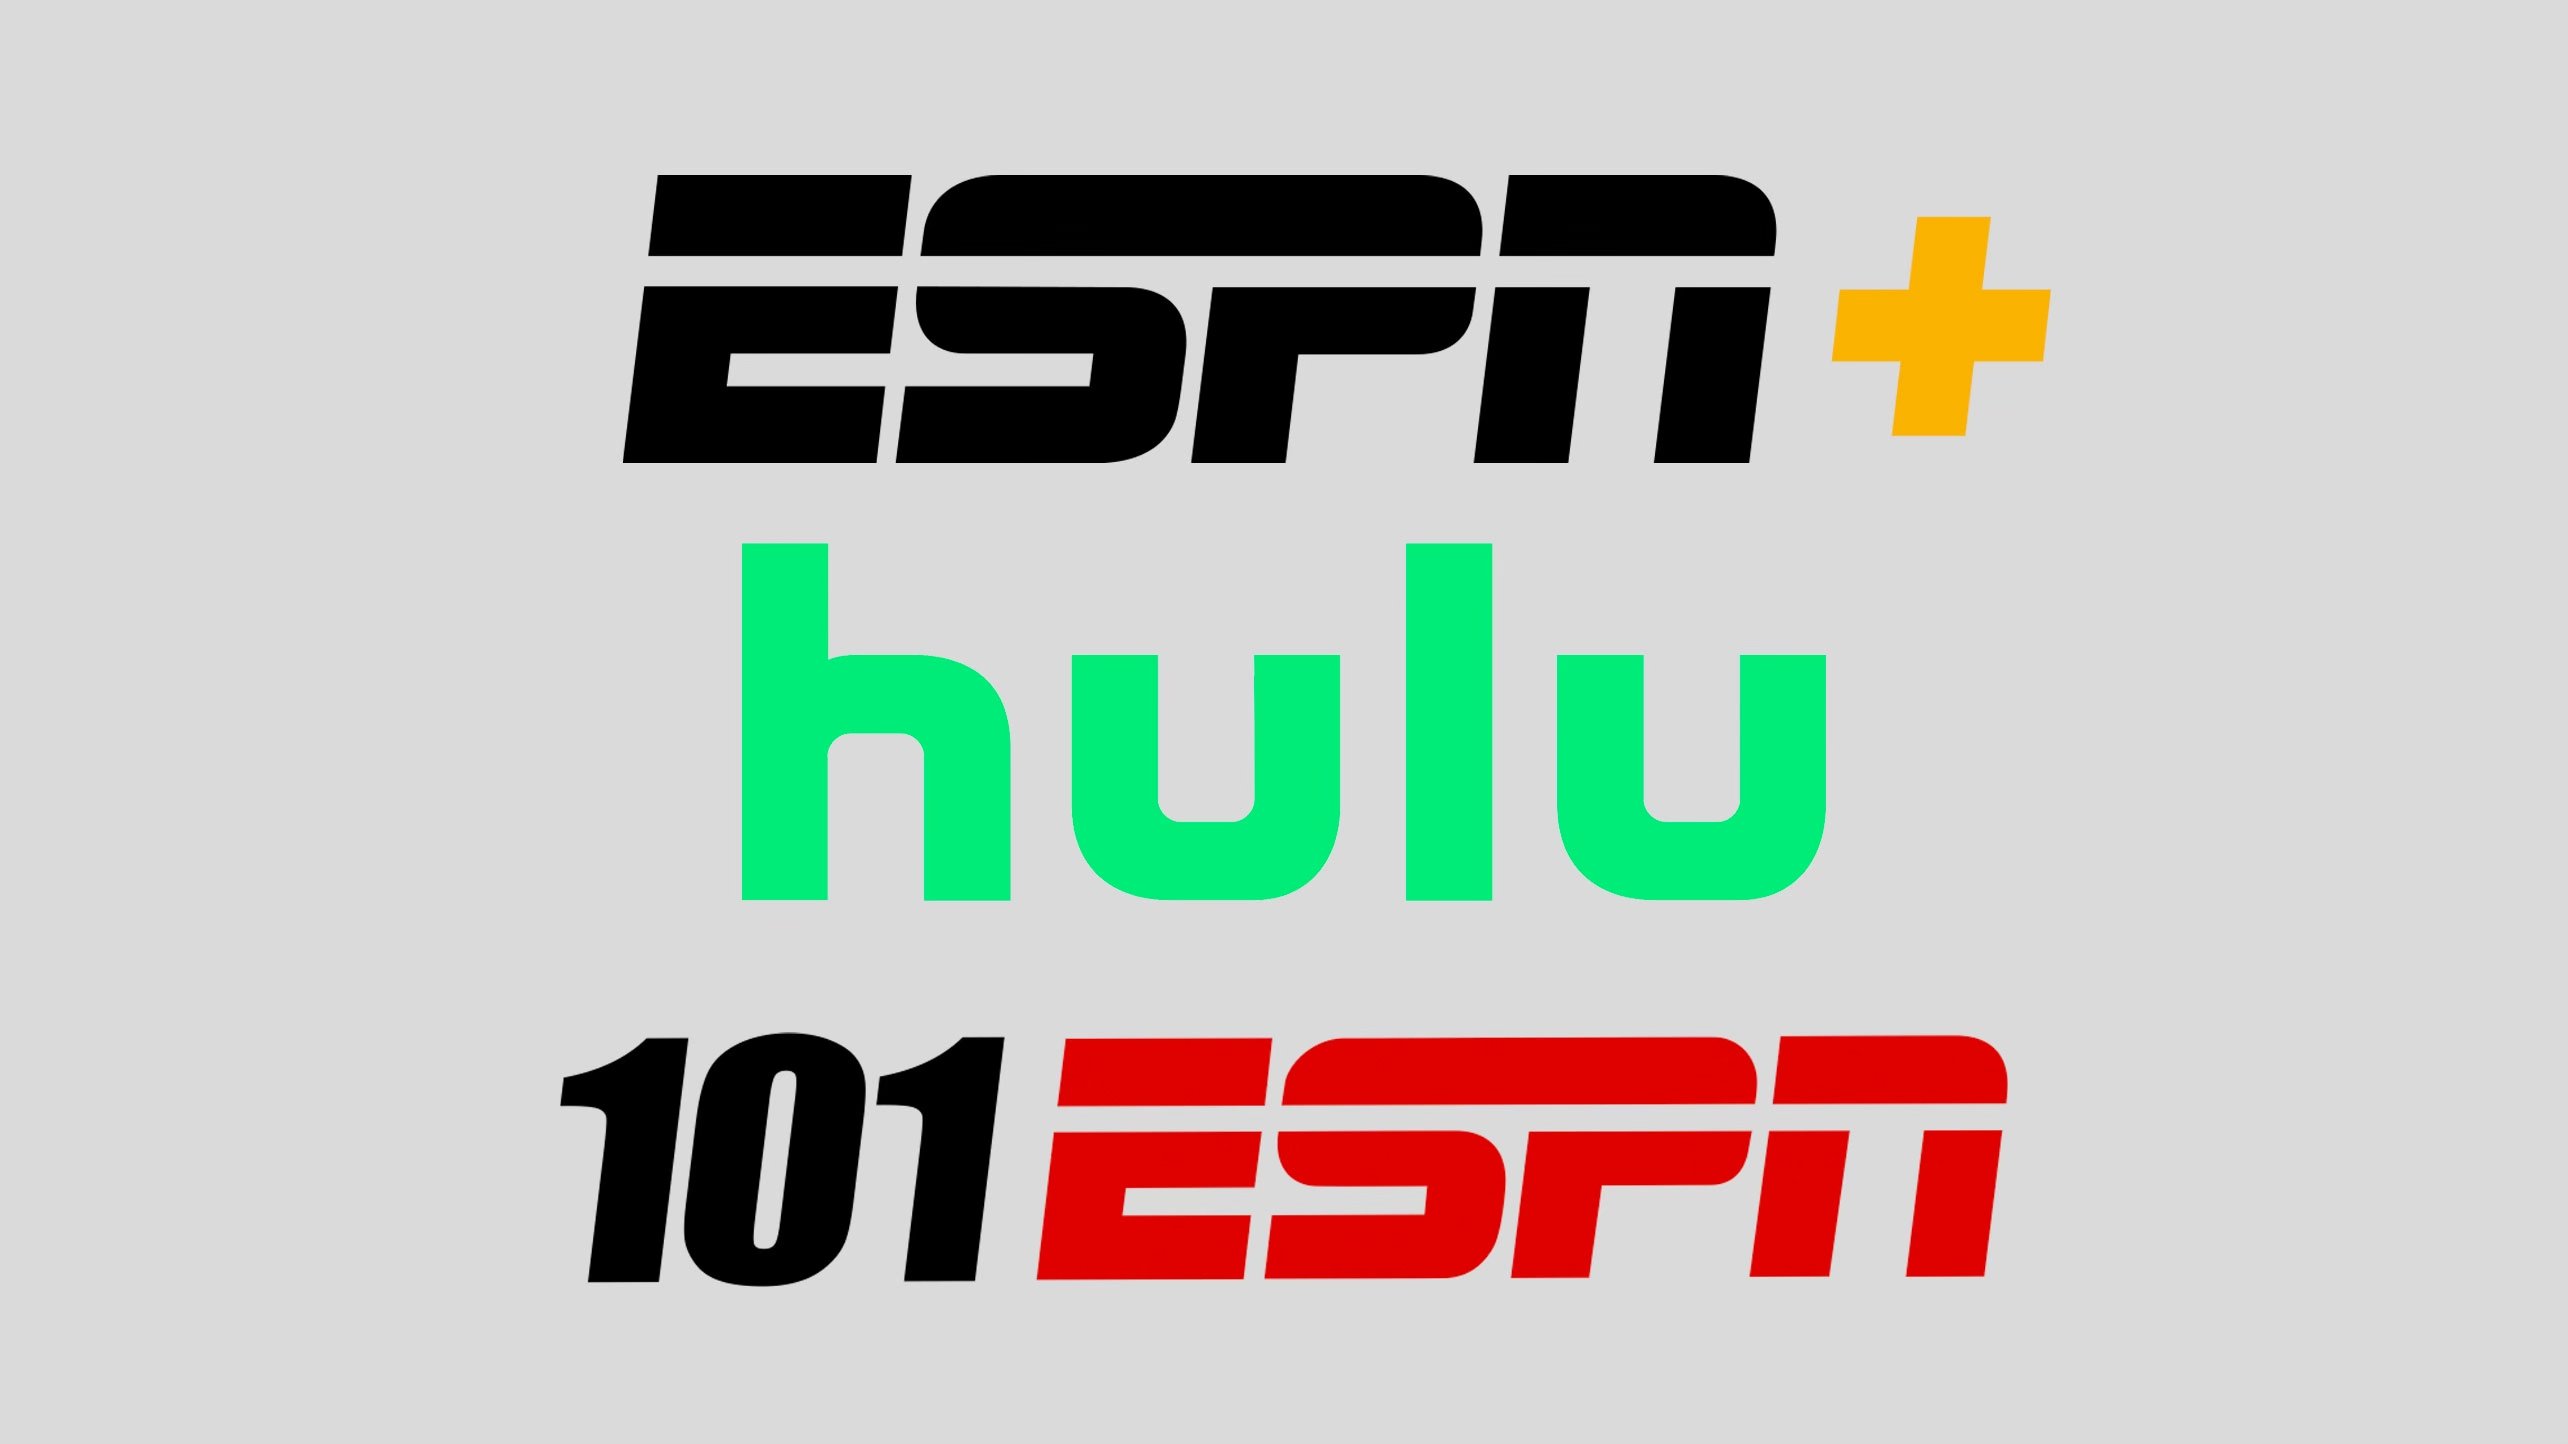 St. Louis Blues on ESPN+ and Hulu